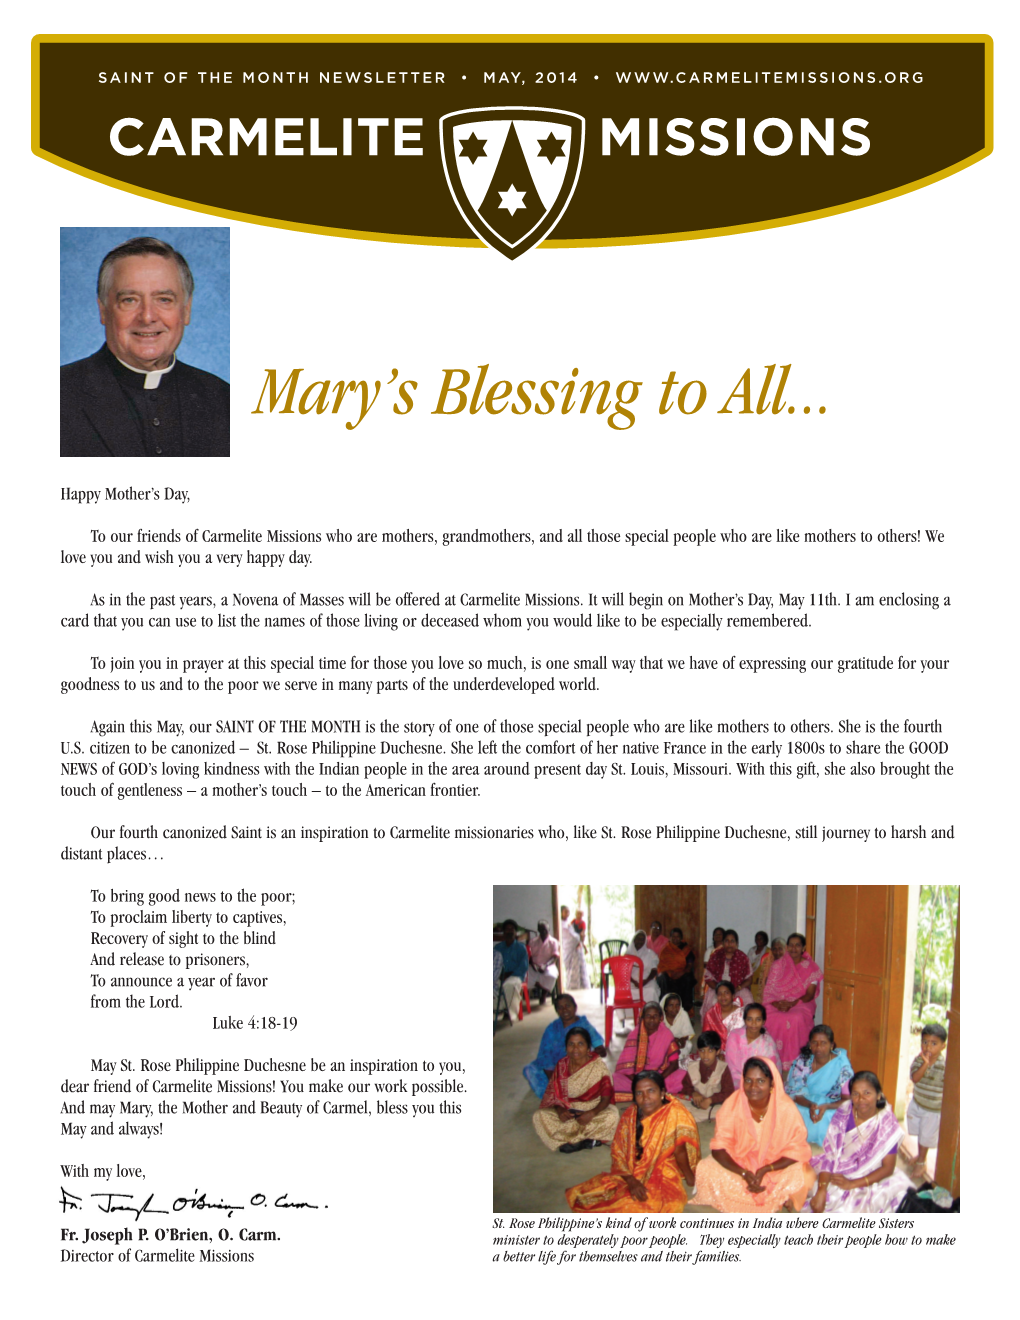 Mission News May 2014